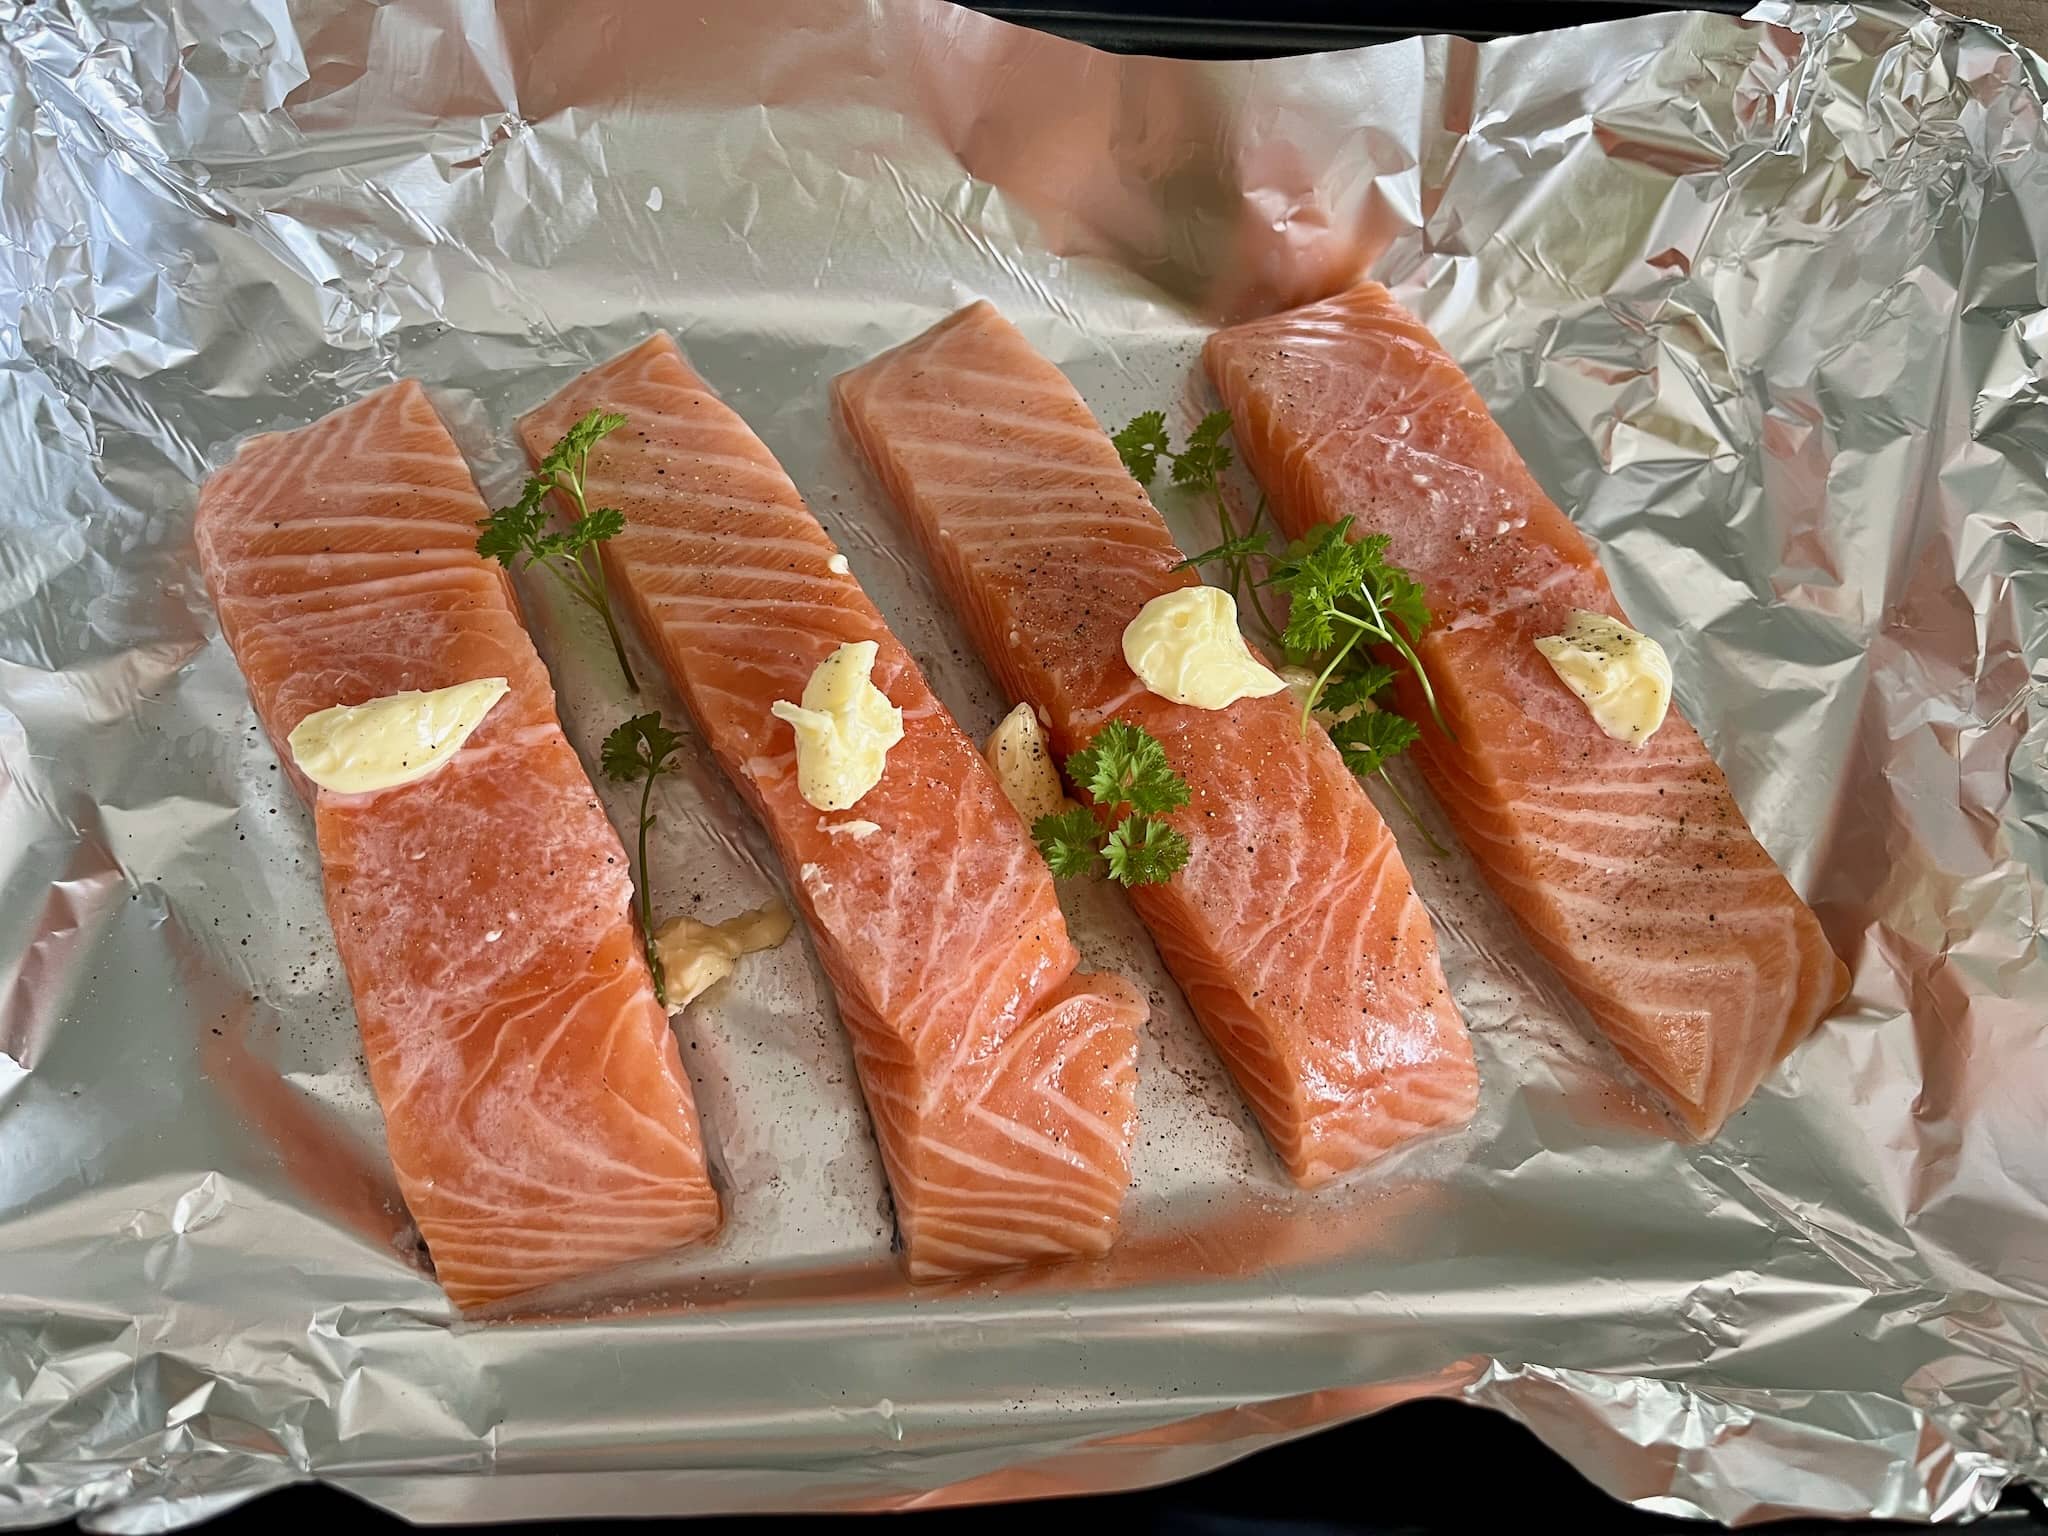 Seasoned salmon with butter on top placed on the tray ready to be cooked